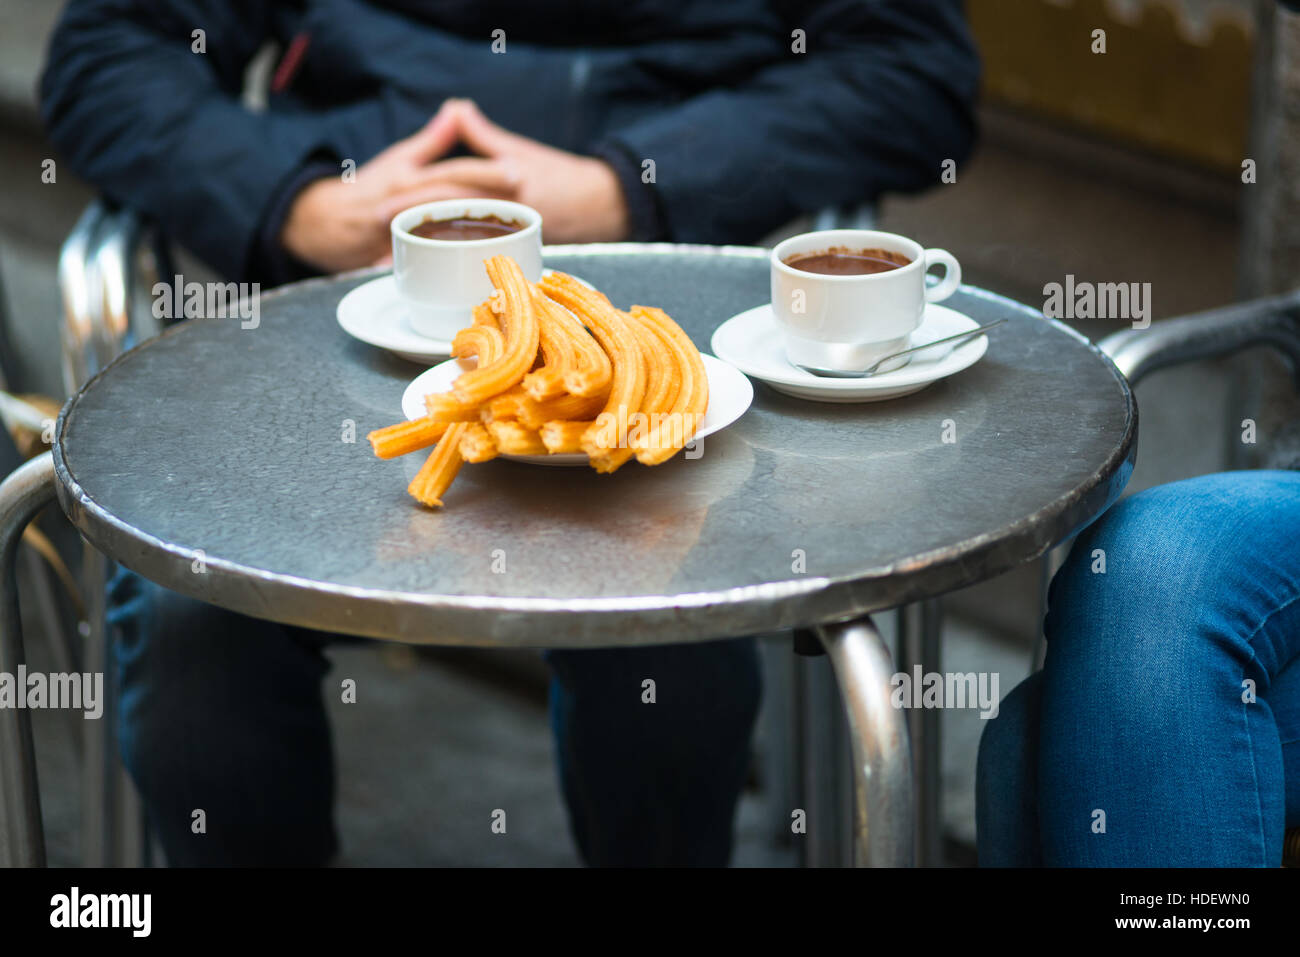 Churros with chocolate, a typical Spanish sweet snack. Madrid. Stock Photo